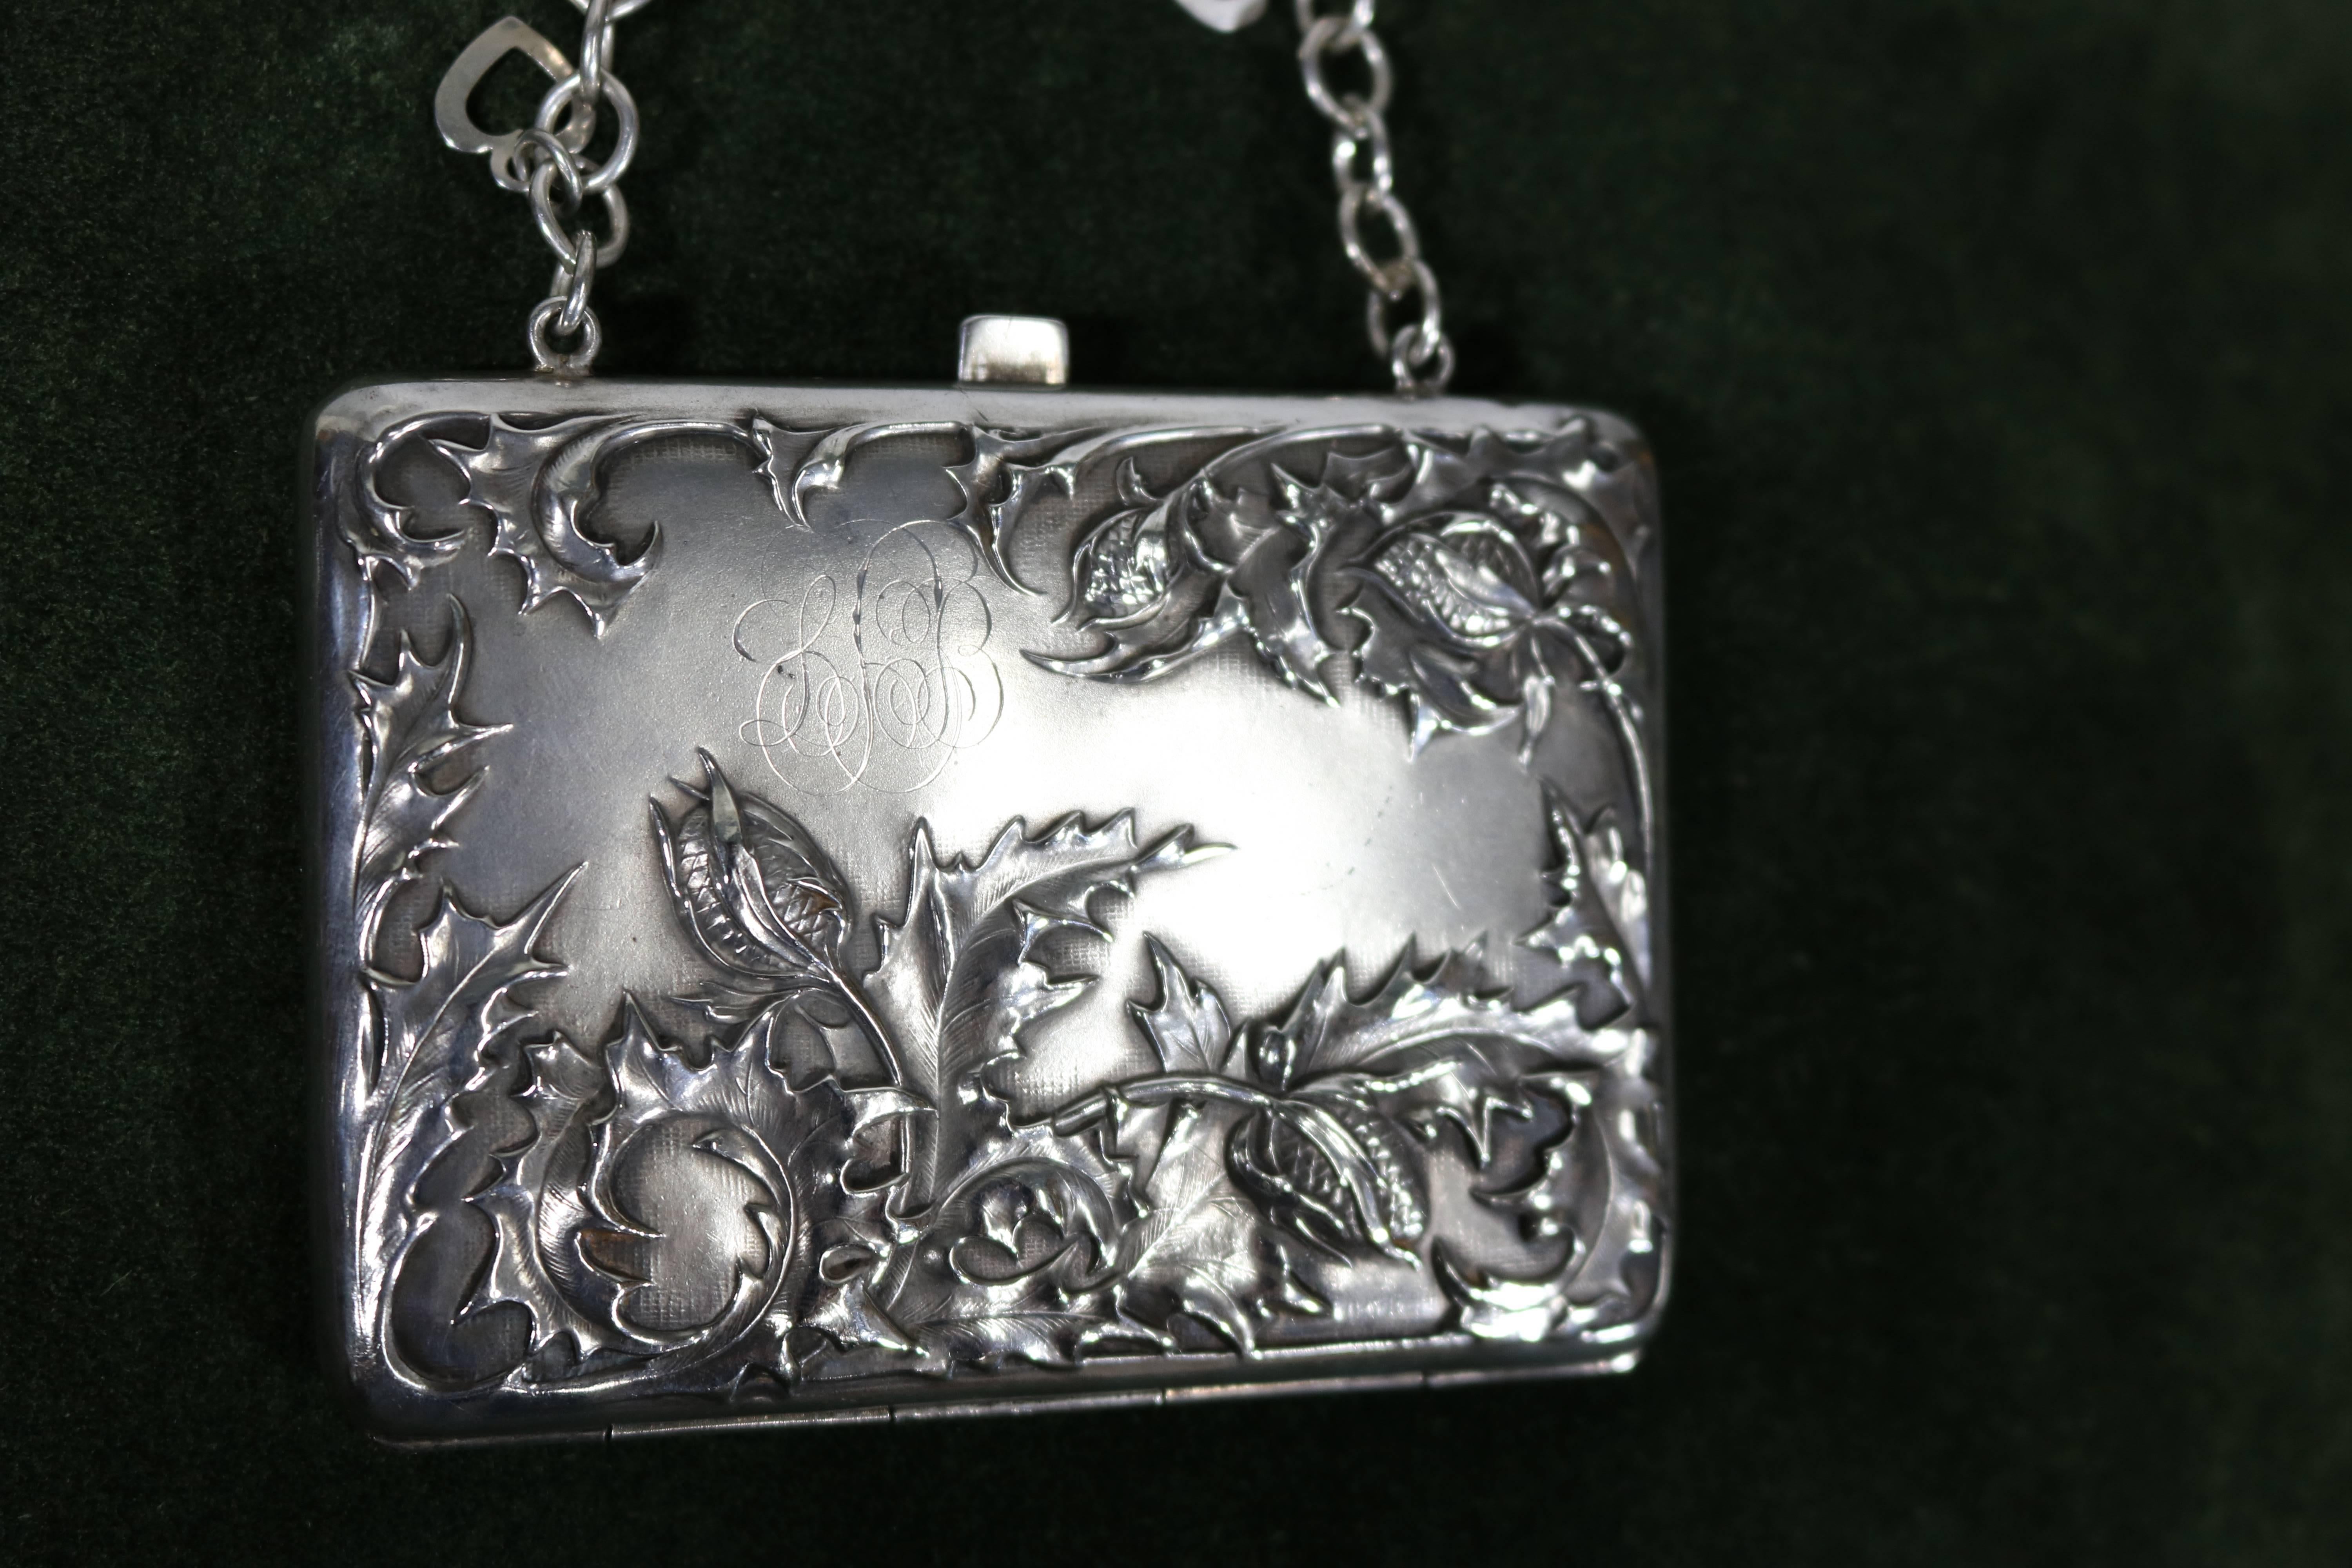 Sterling silver chased repoussé purse or card case with double sided lovely flora & fauna design. Marked sterling on interior frame, light blue linen fabric interior pockets--(some staining on linen--) rectangular and hinged. Has lightly engraved